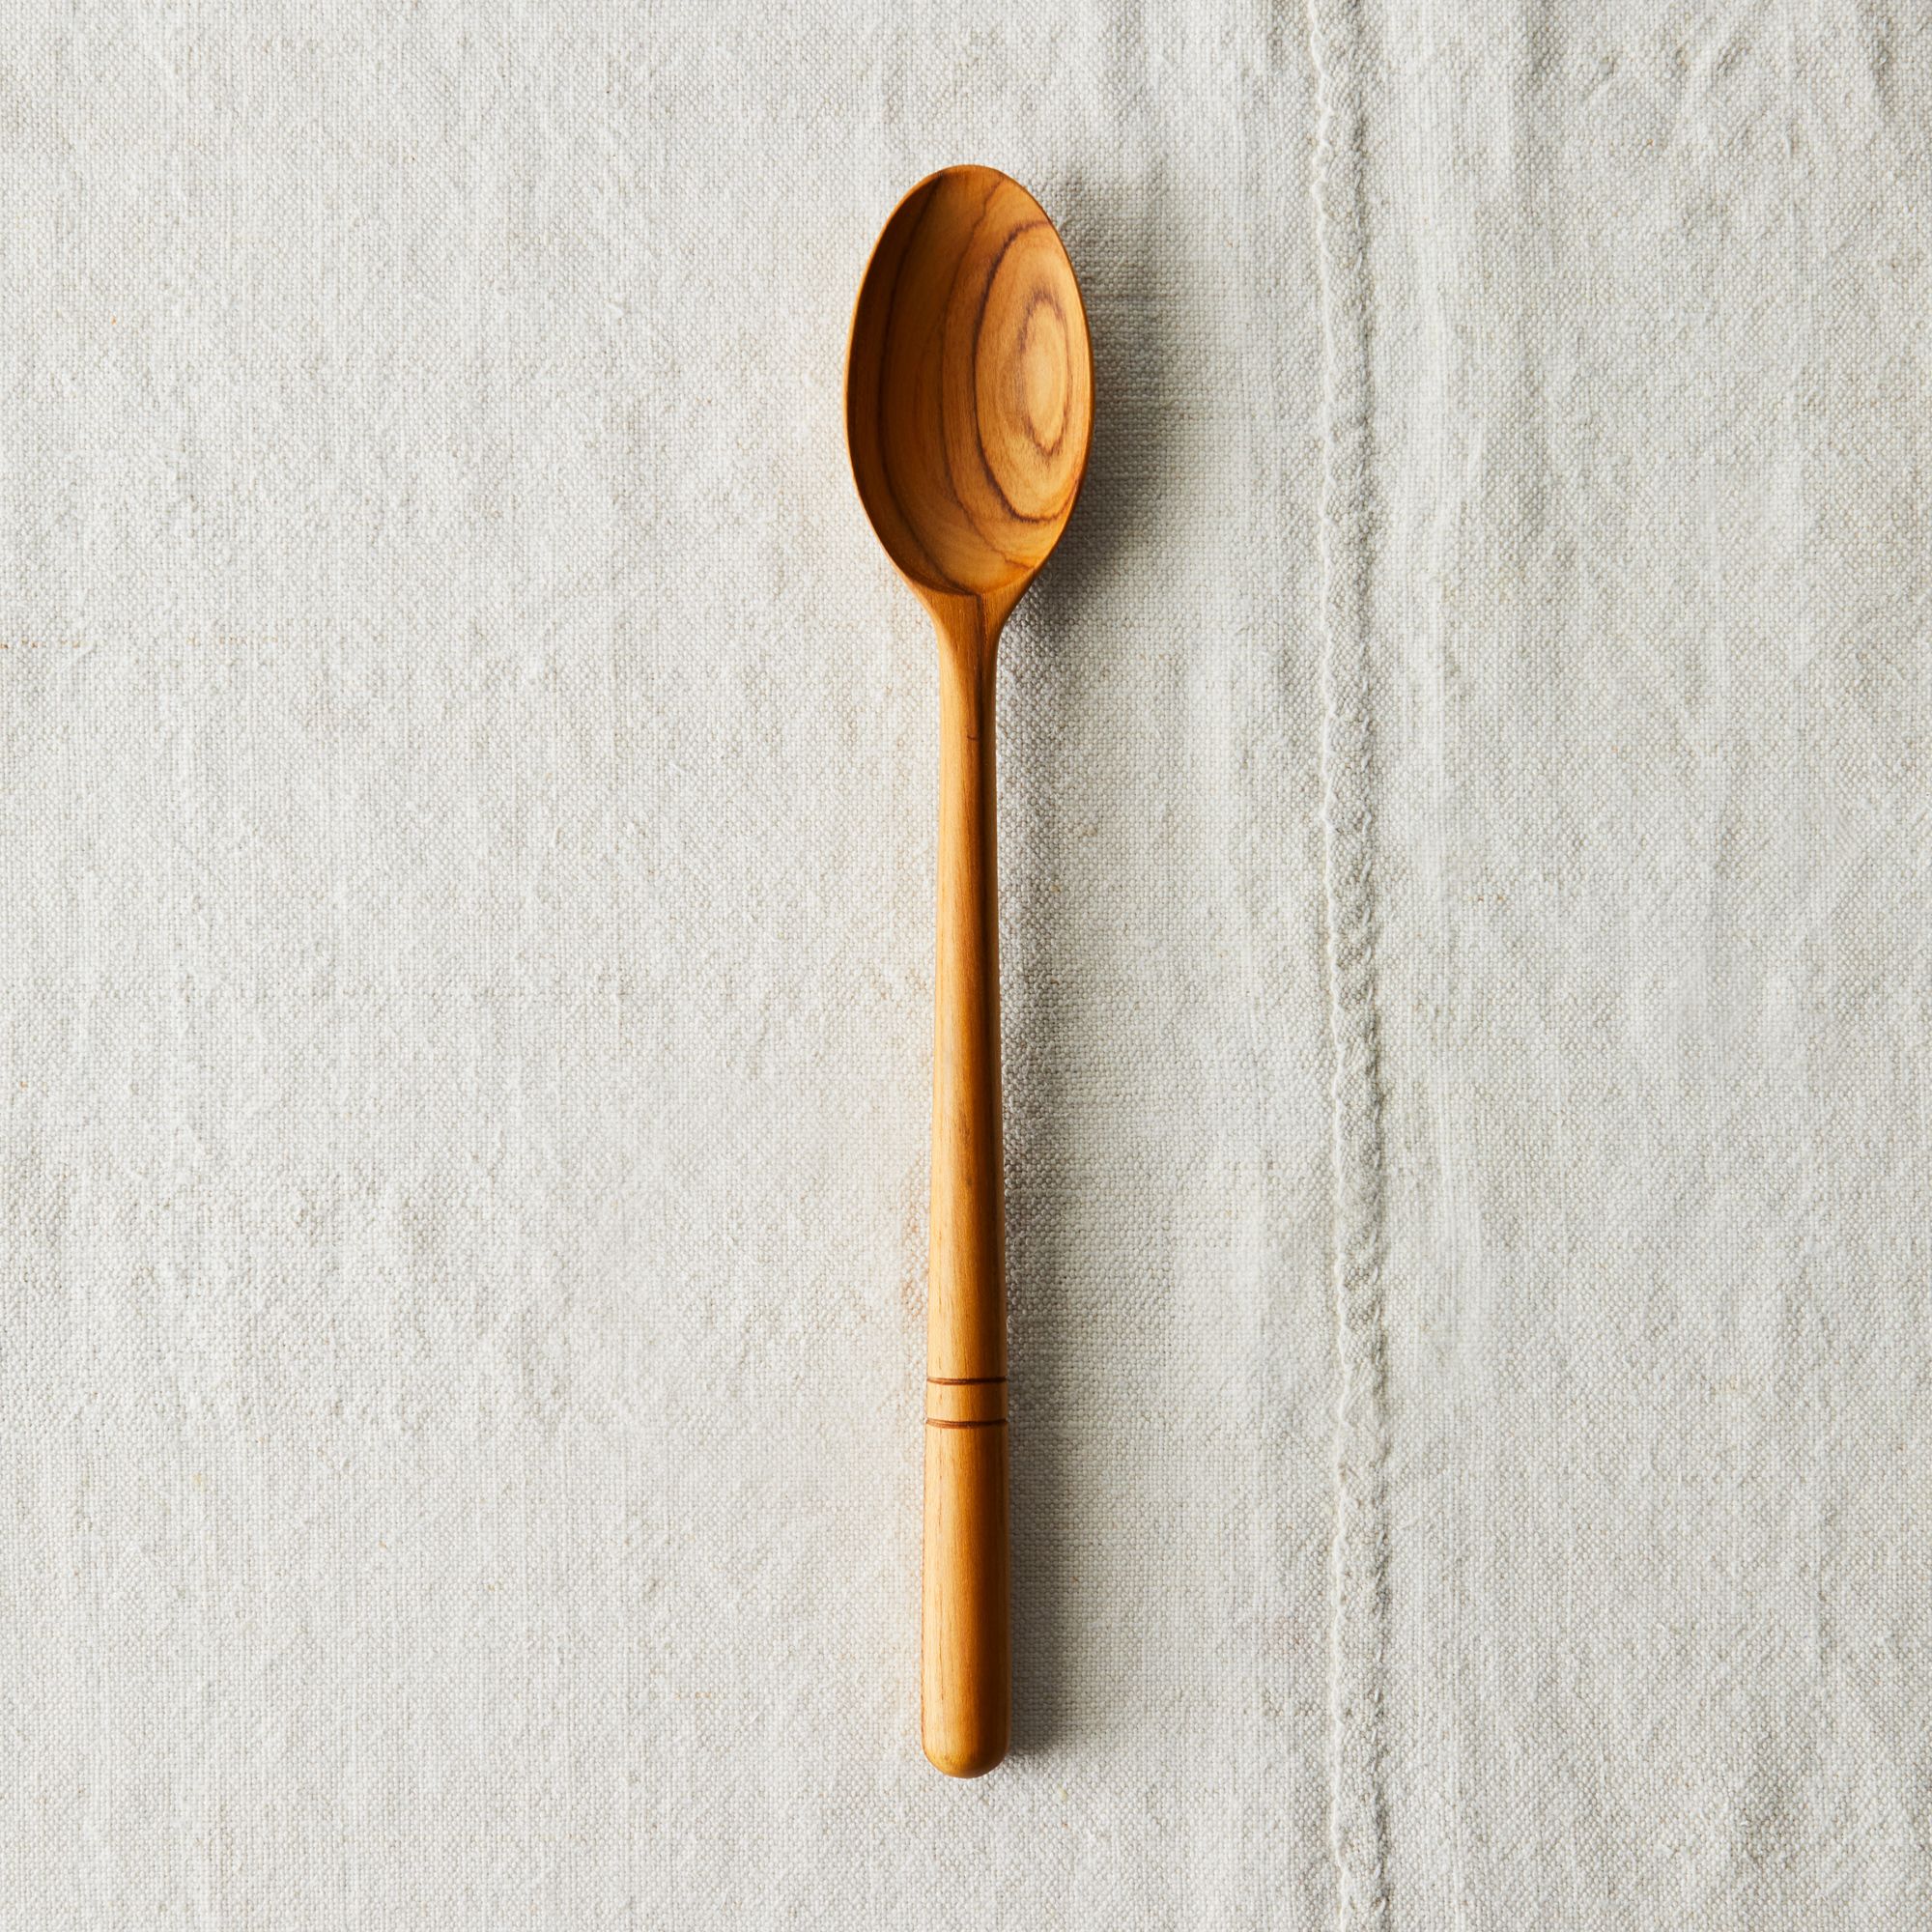 Five Two Wooden Spoons